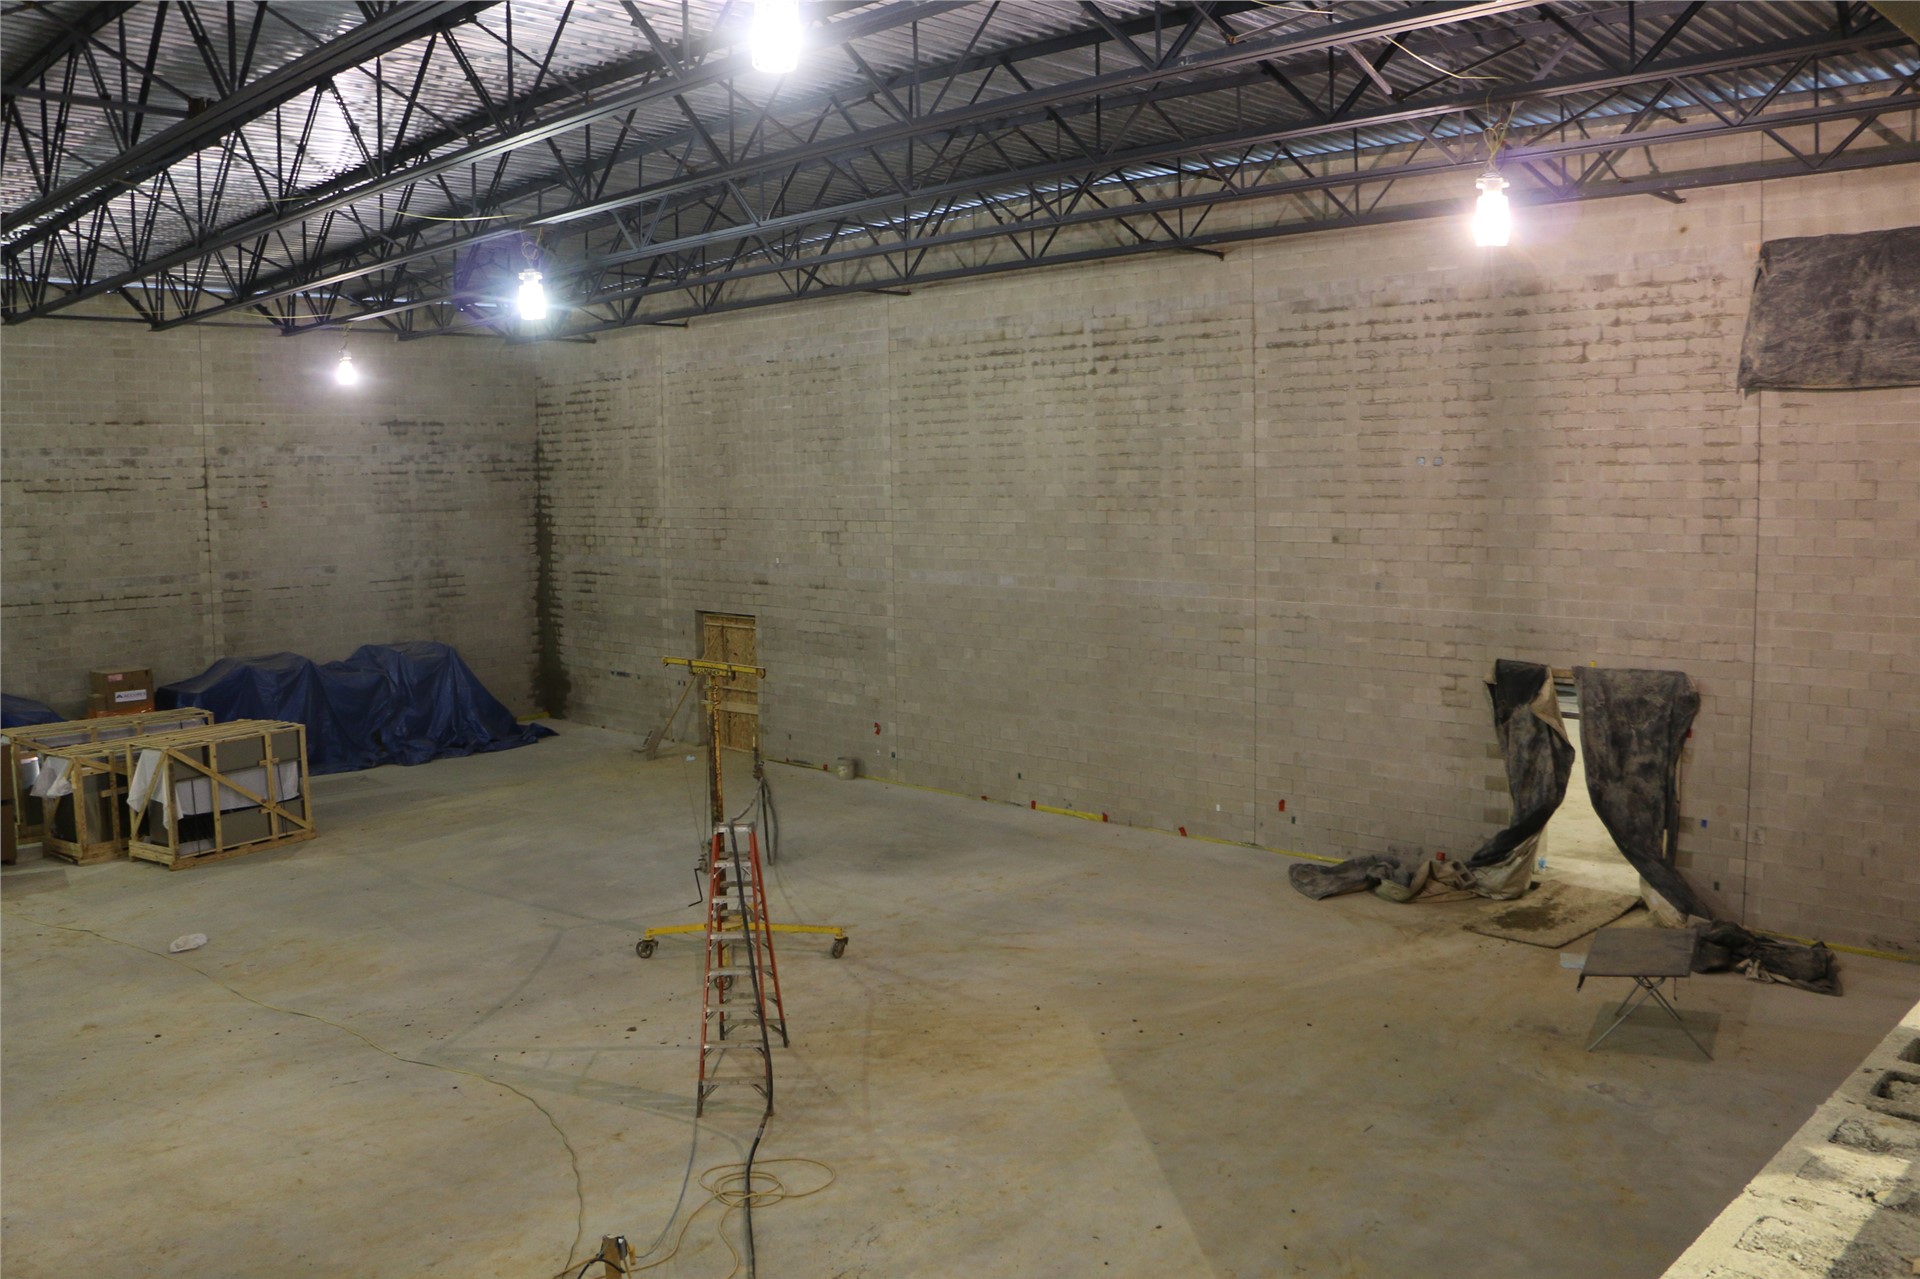 The southeast wall of the Gymnasium as seen from the press box